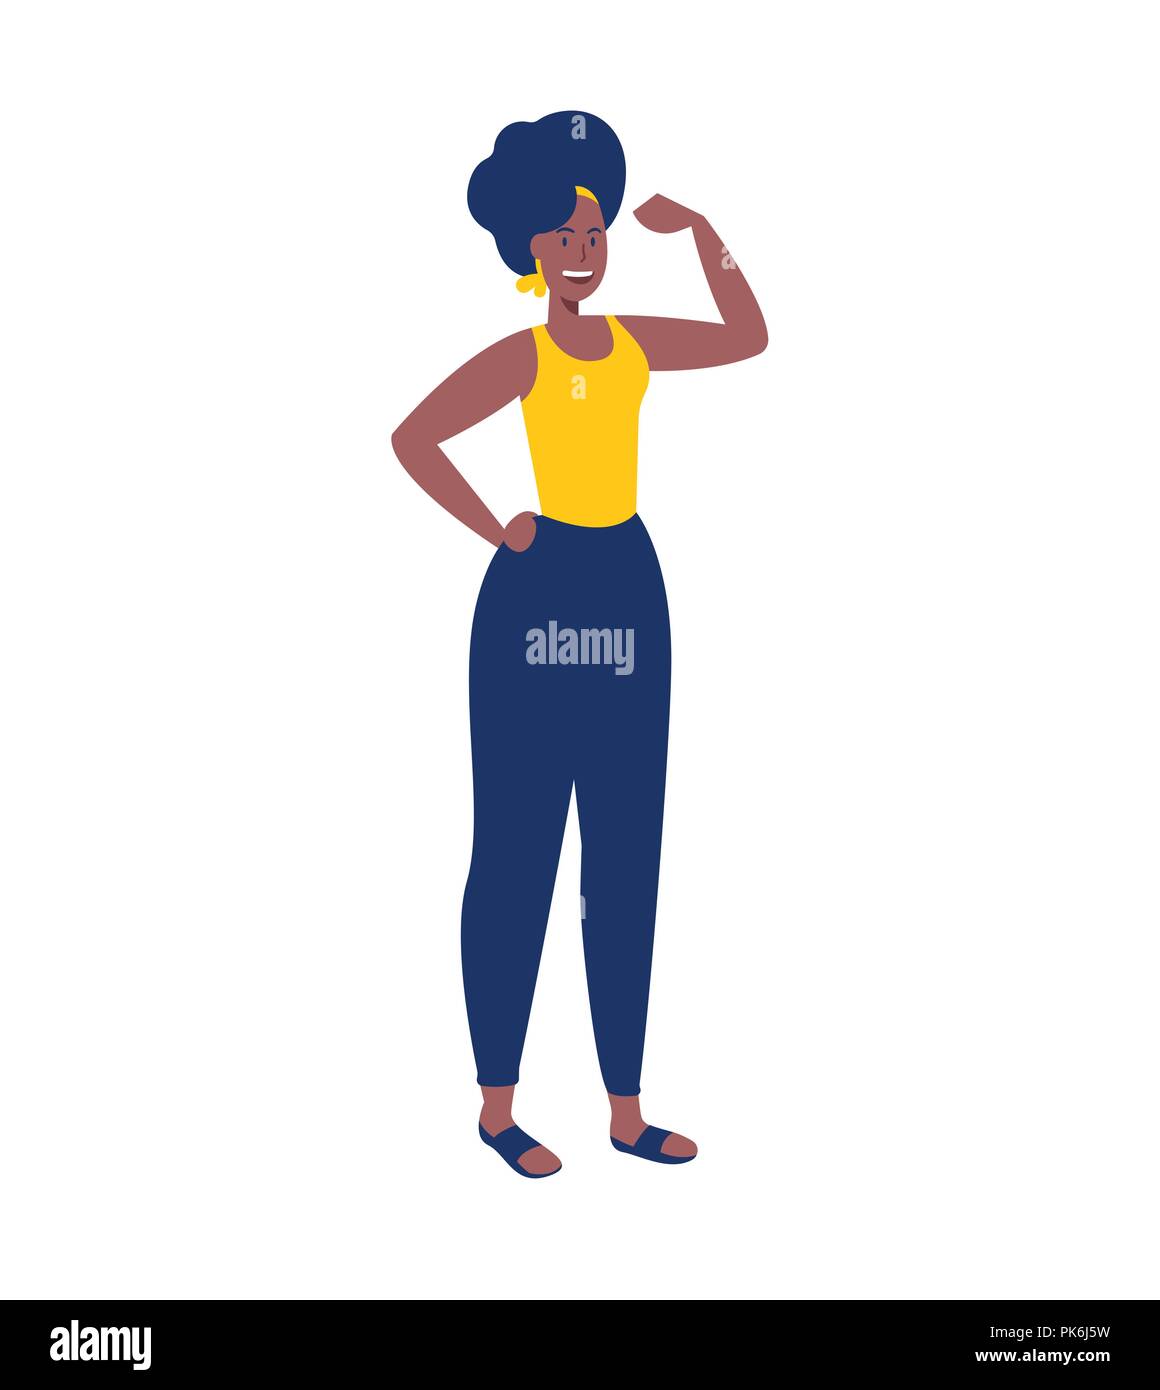 Strong woman isolated illustration. African american female doing flexing gesture with arm for girl power, strength or health and fitness concept. EPS Stock Vector